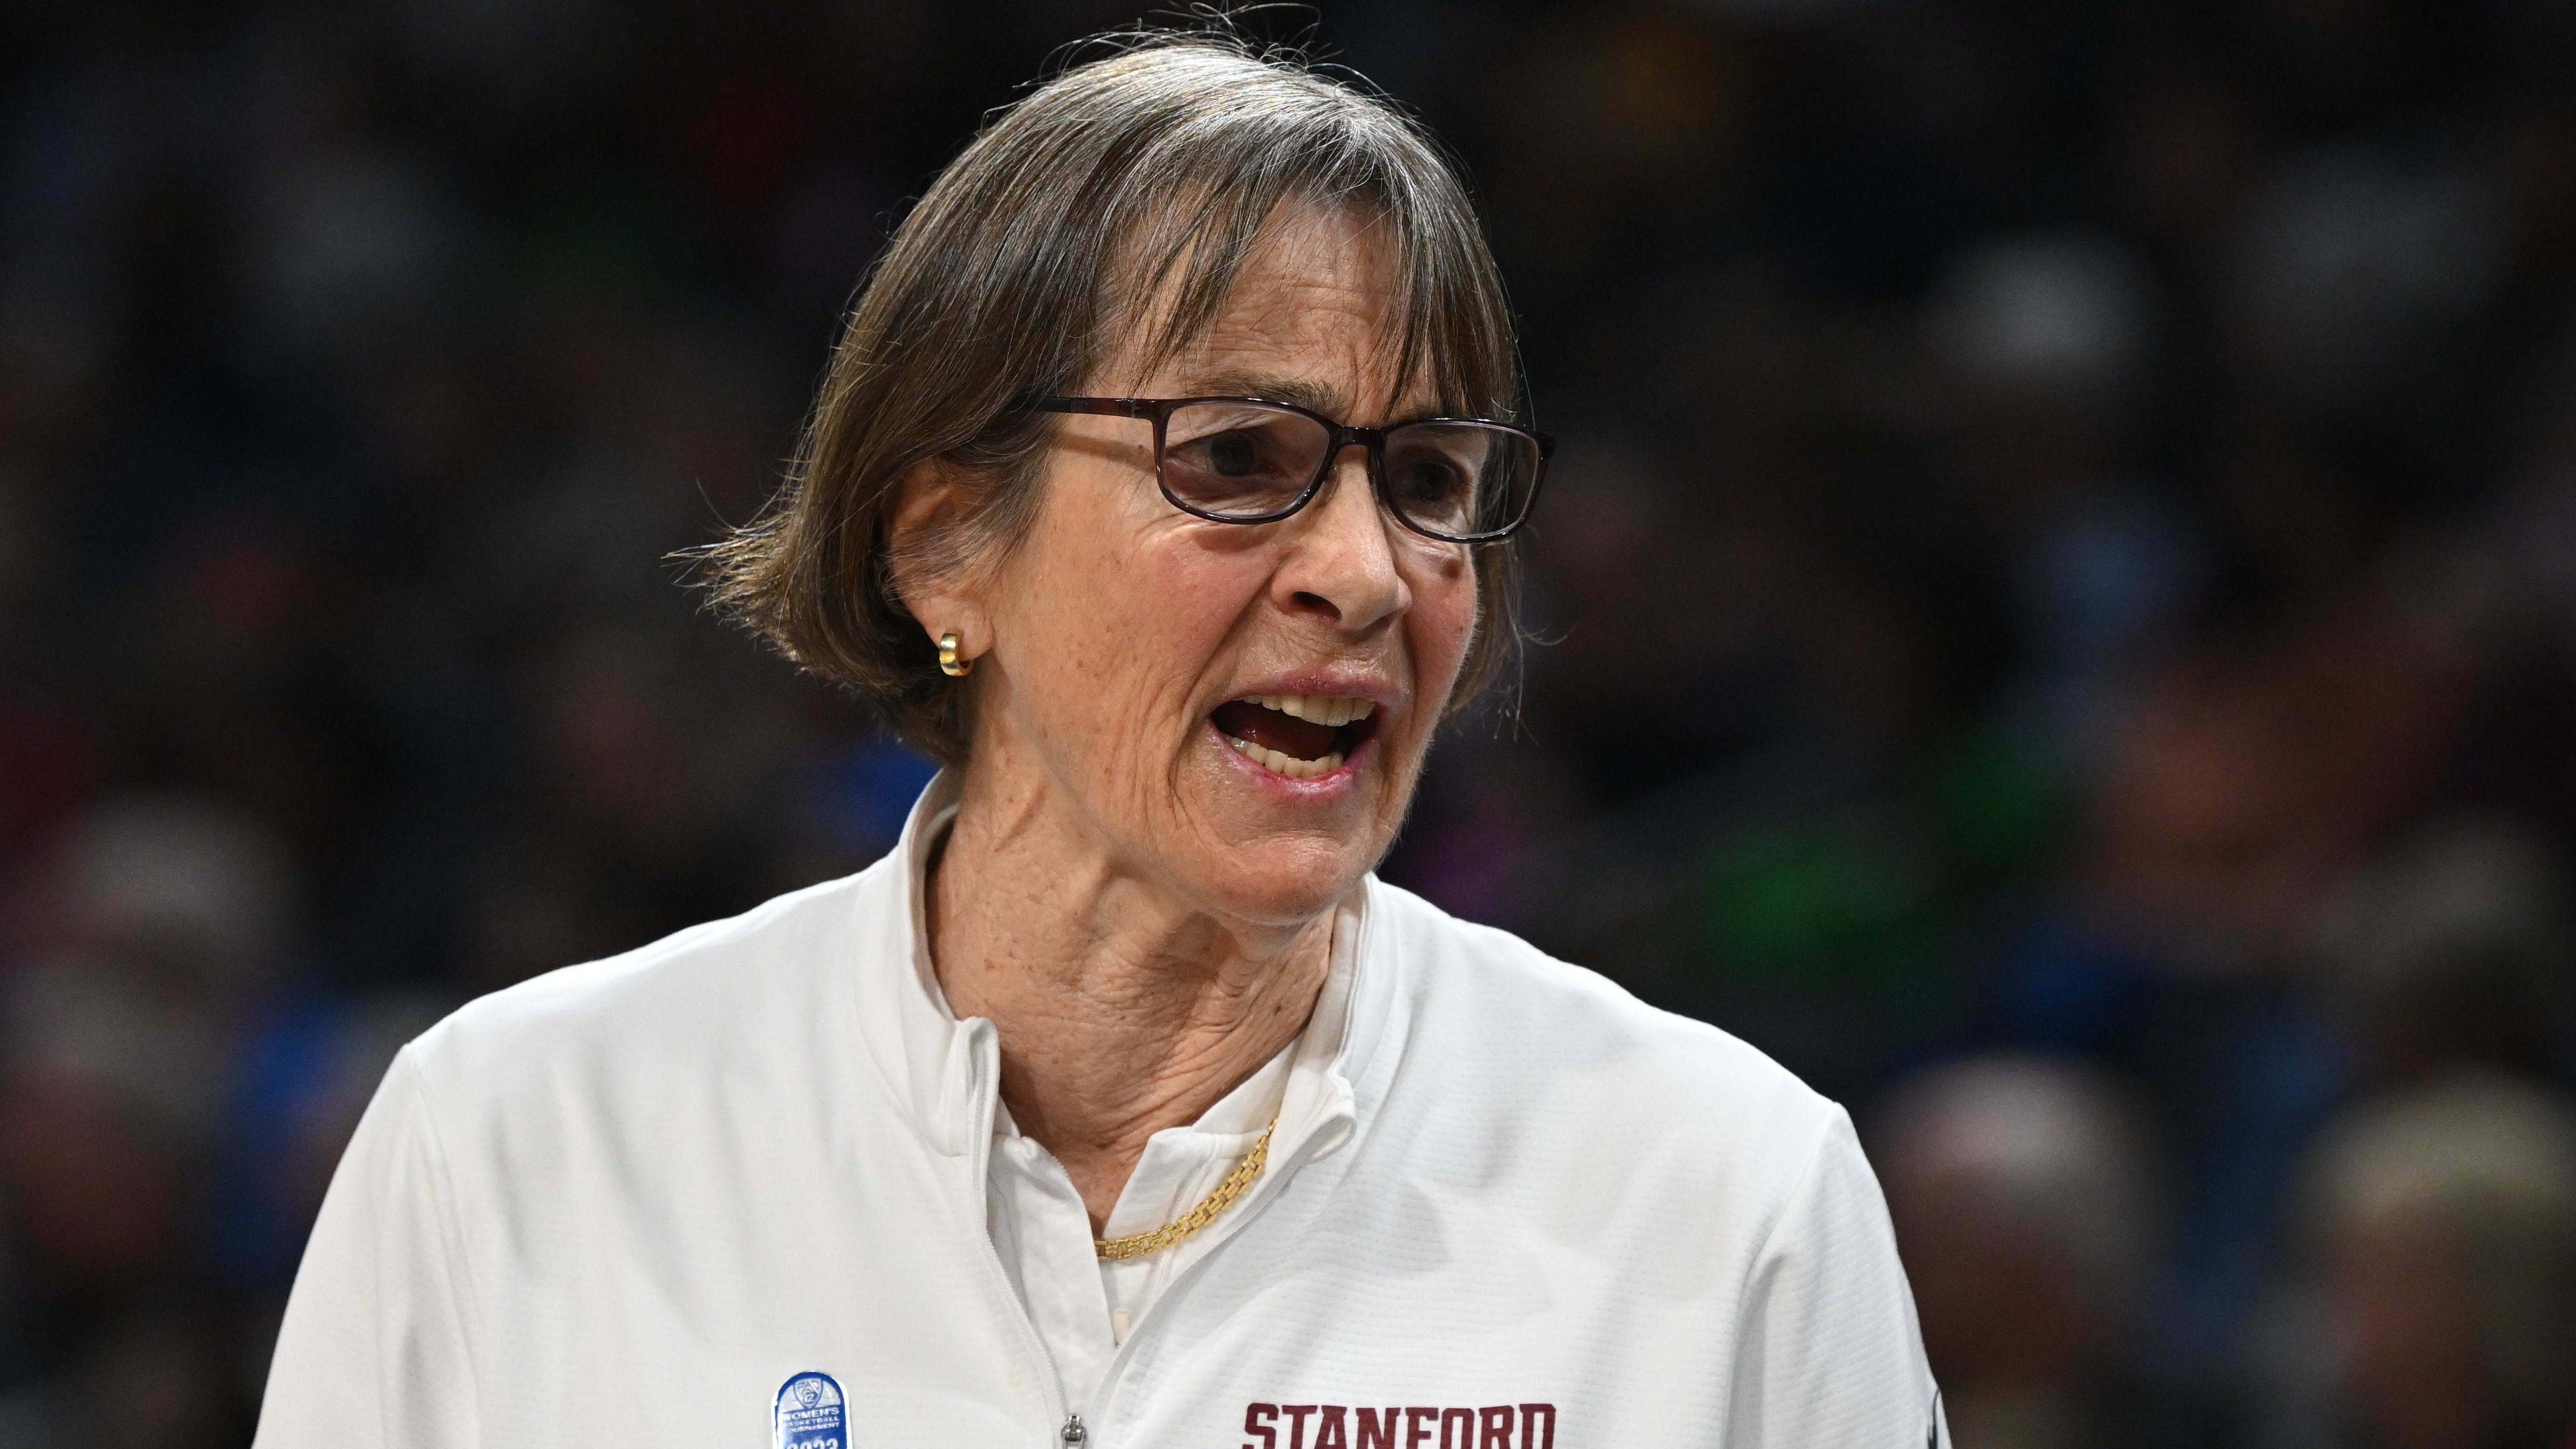 Stanford Cardinal head coach Tara VanDerveer coaches from the bench.